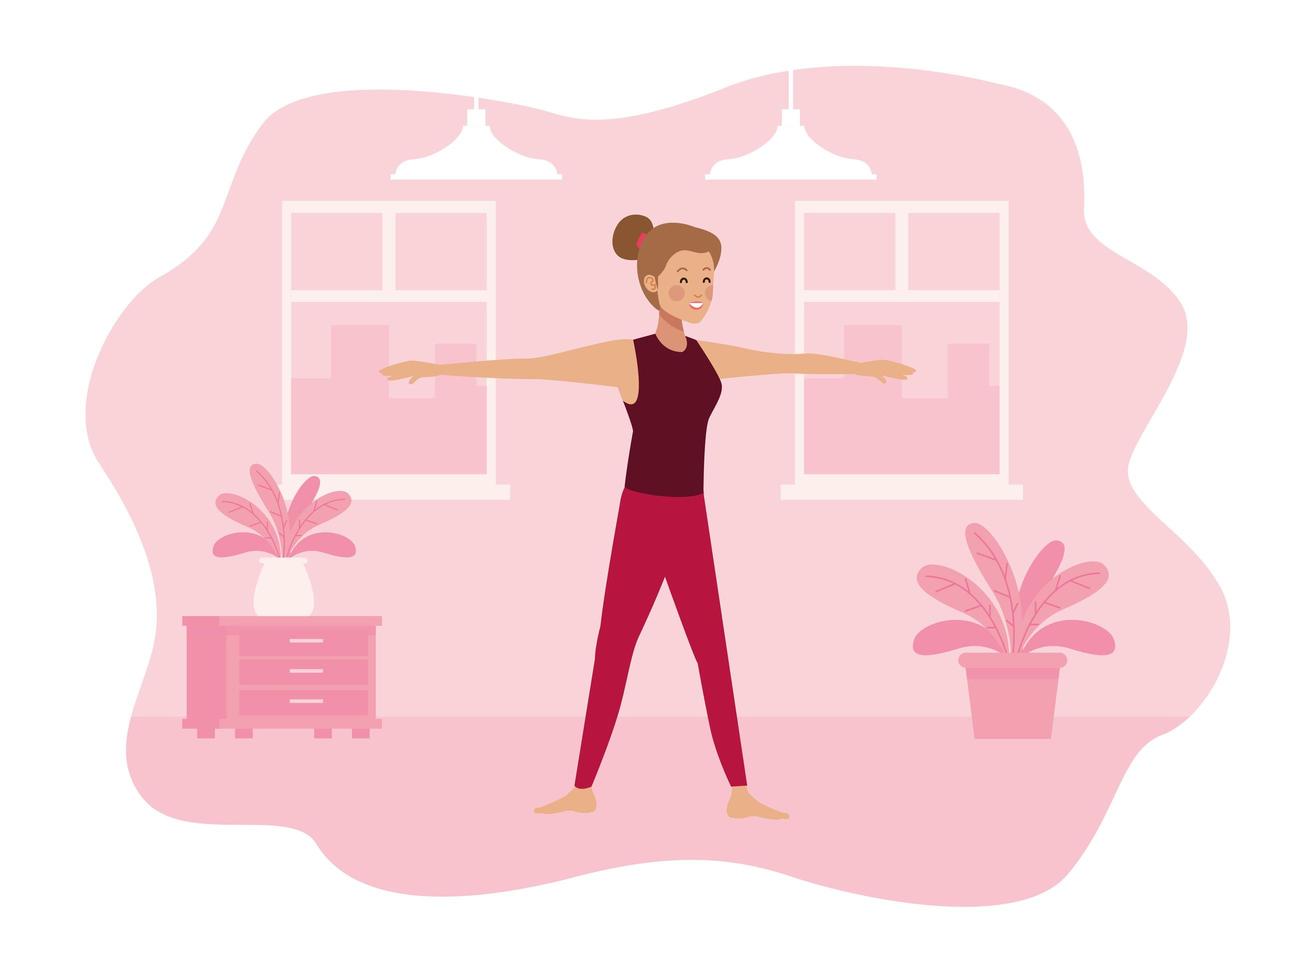 Young woman practicing exercise in the house scene vector